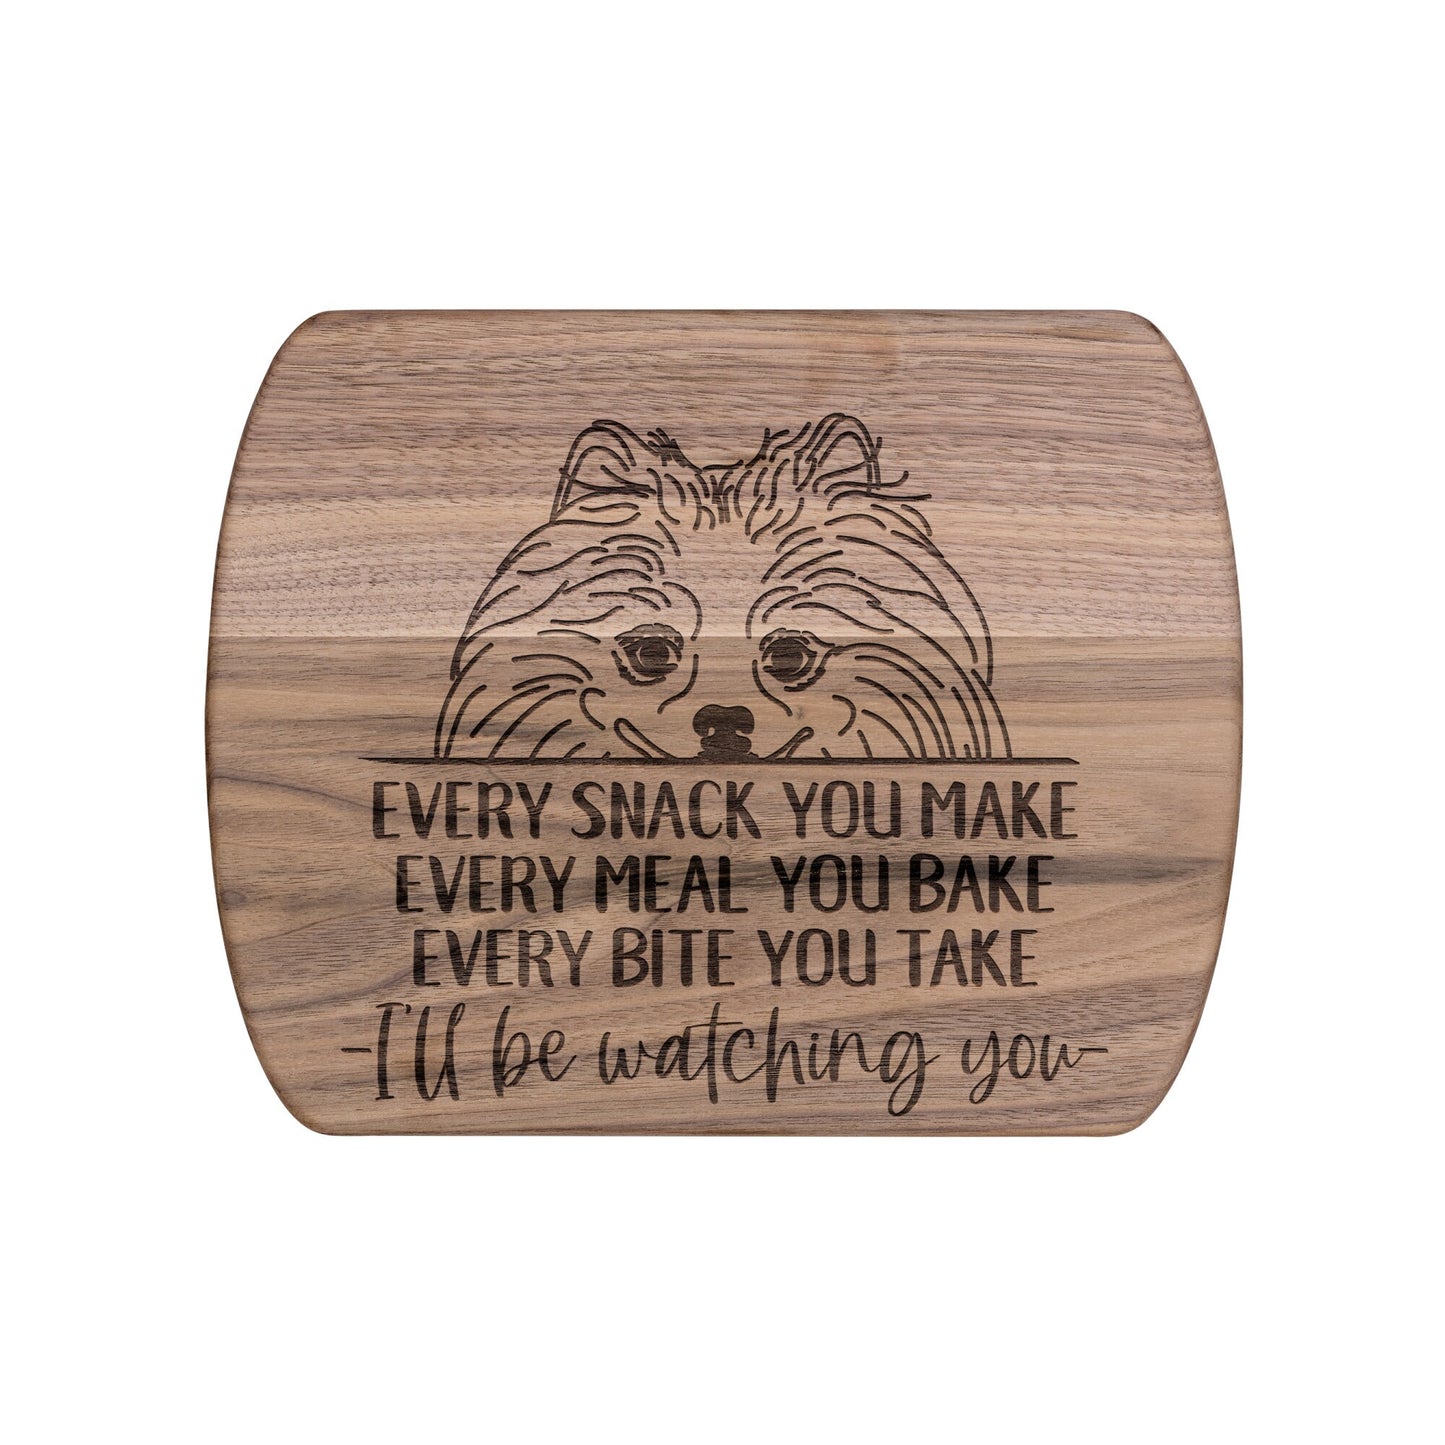 Pomeranian Snack Funny Cutting Board for Dog Mom, Dog Lover Wood Serving Board, Dog Charcuterie Board, Wooden Chopping Board Gifts for Him